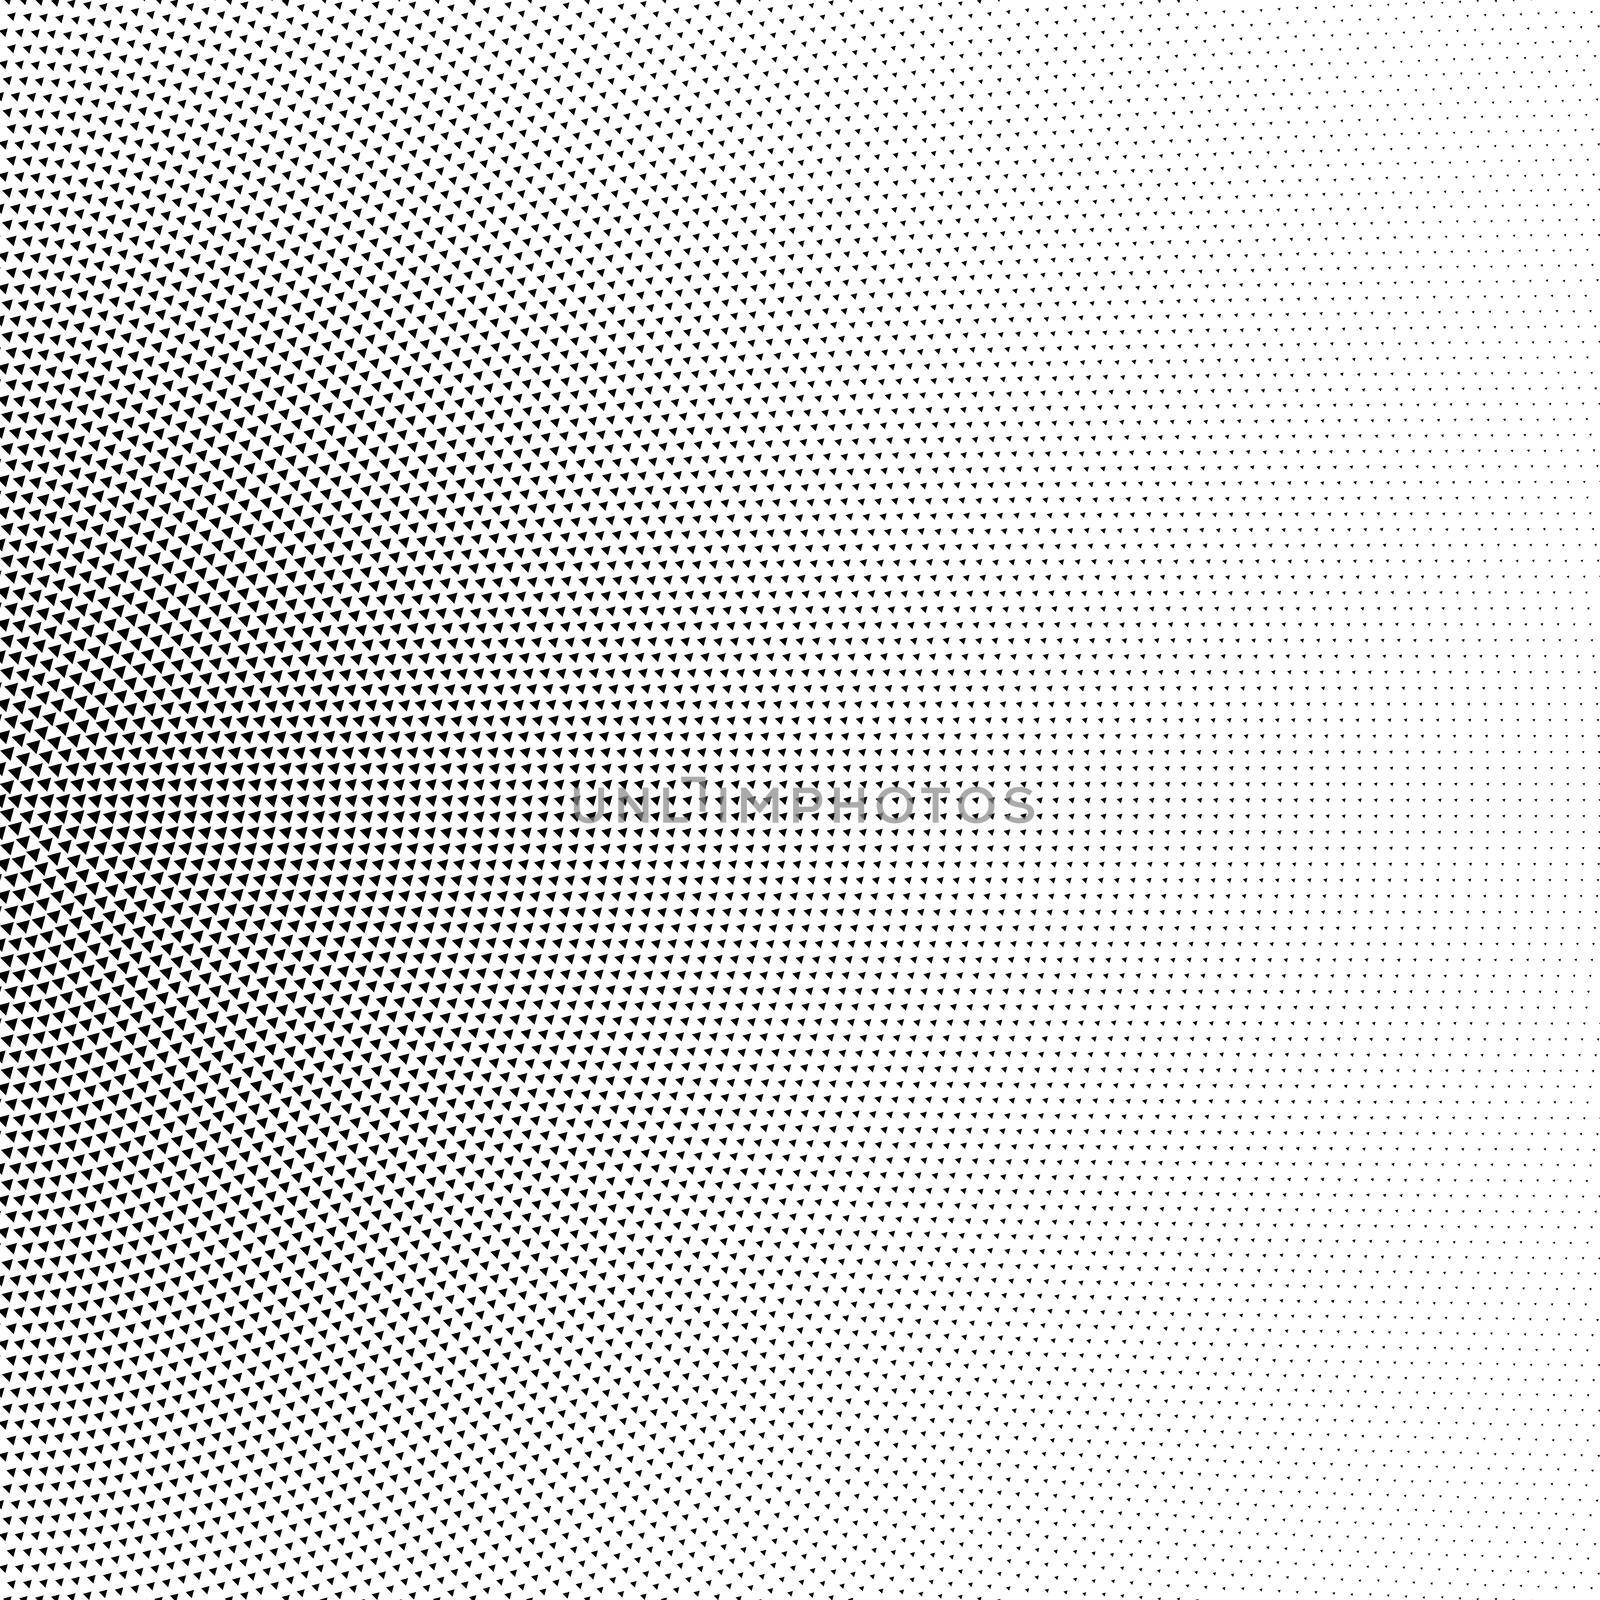 Halftone half circle made of black triangles on white background, abstract gradient illustration